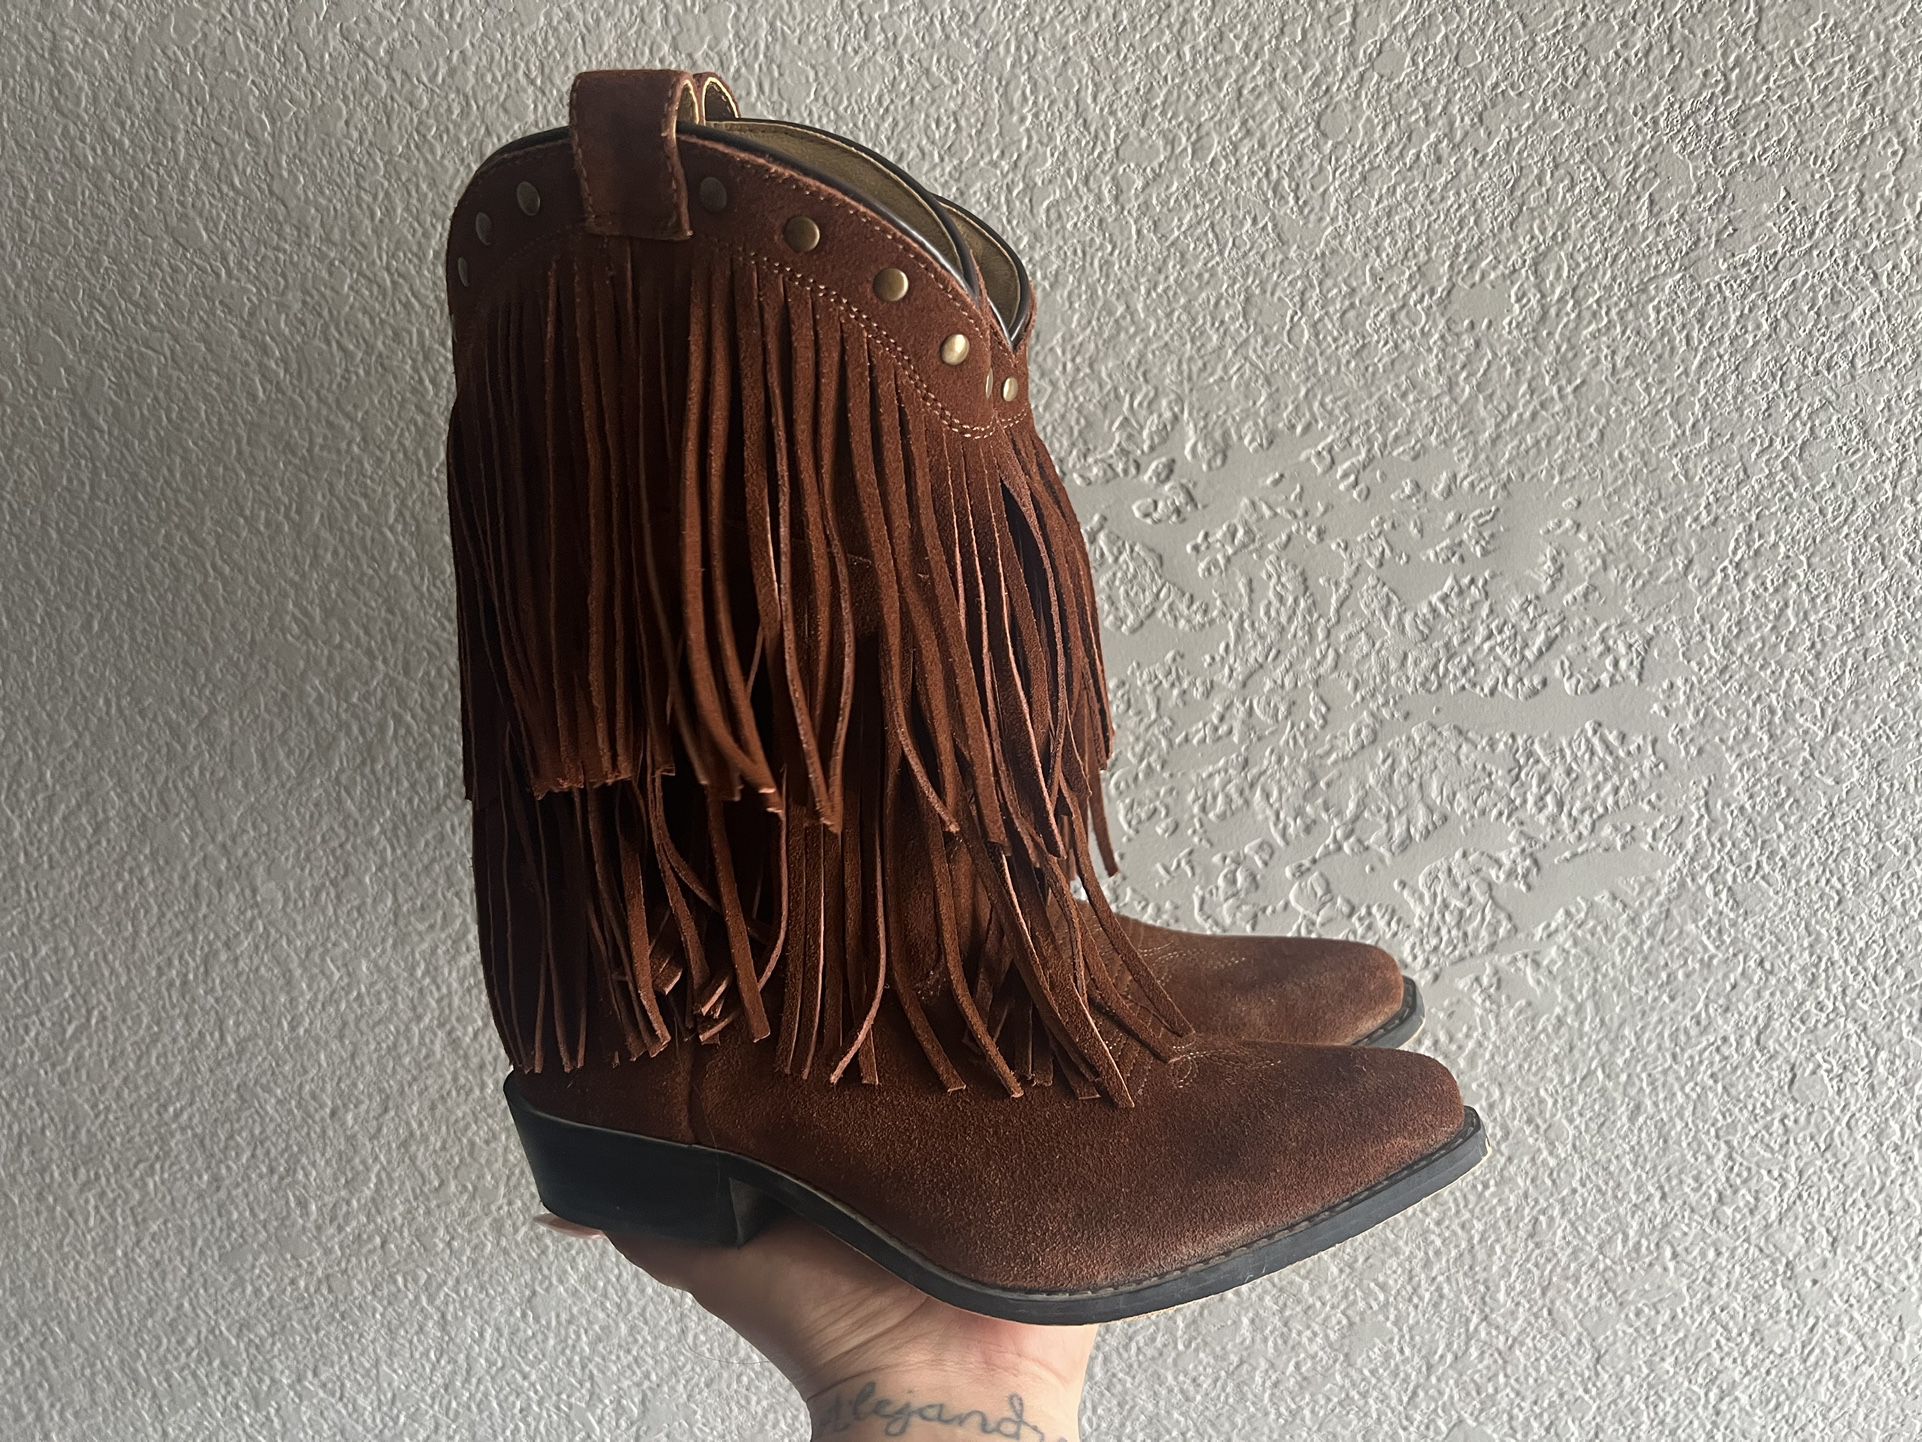 Girls Western Boots Sizes 4 And 6